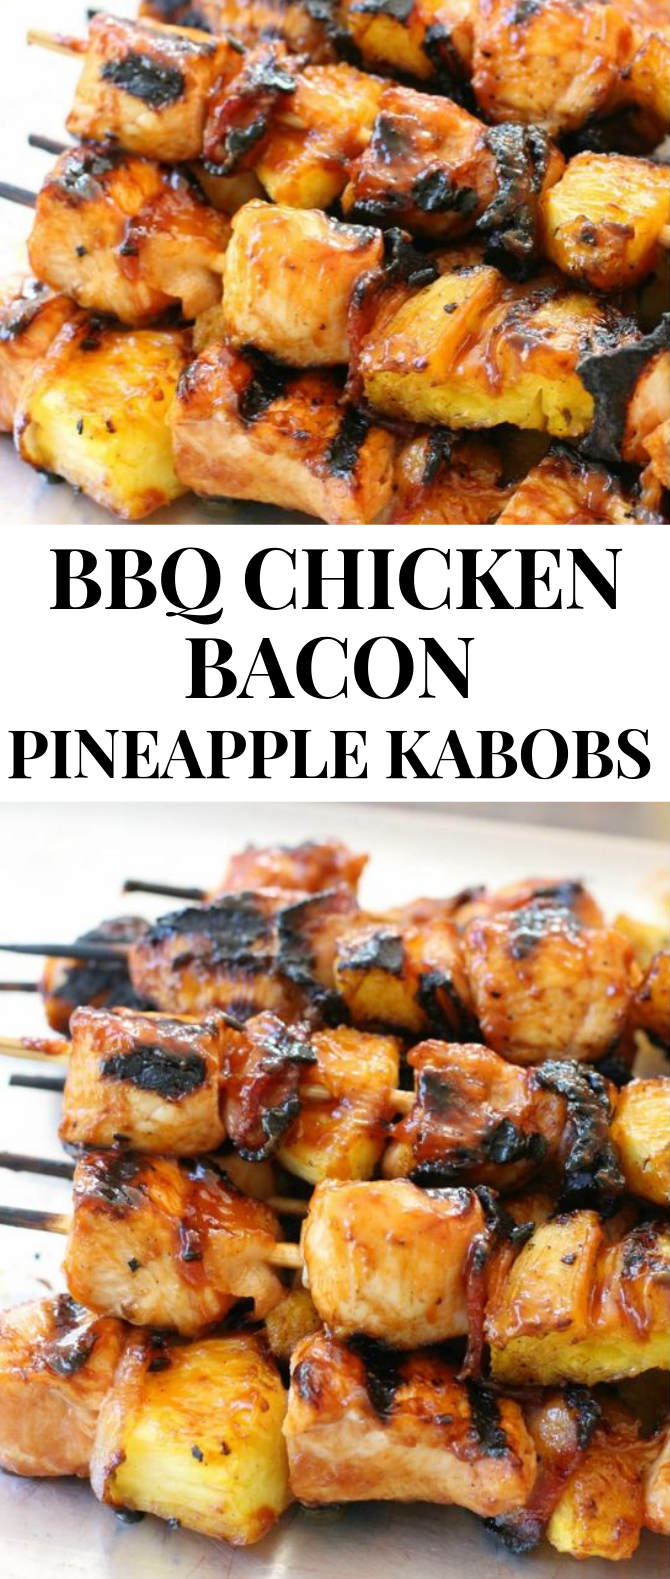 BBQ CHICKEN KABOBS with BACON and PINEAPPLE #BBQ #Chicken